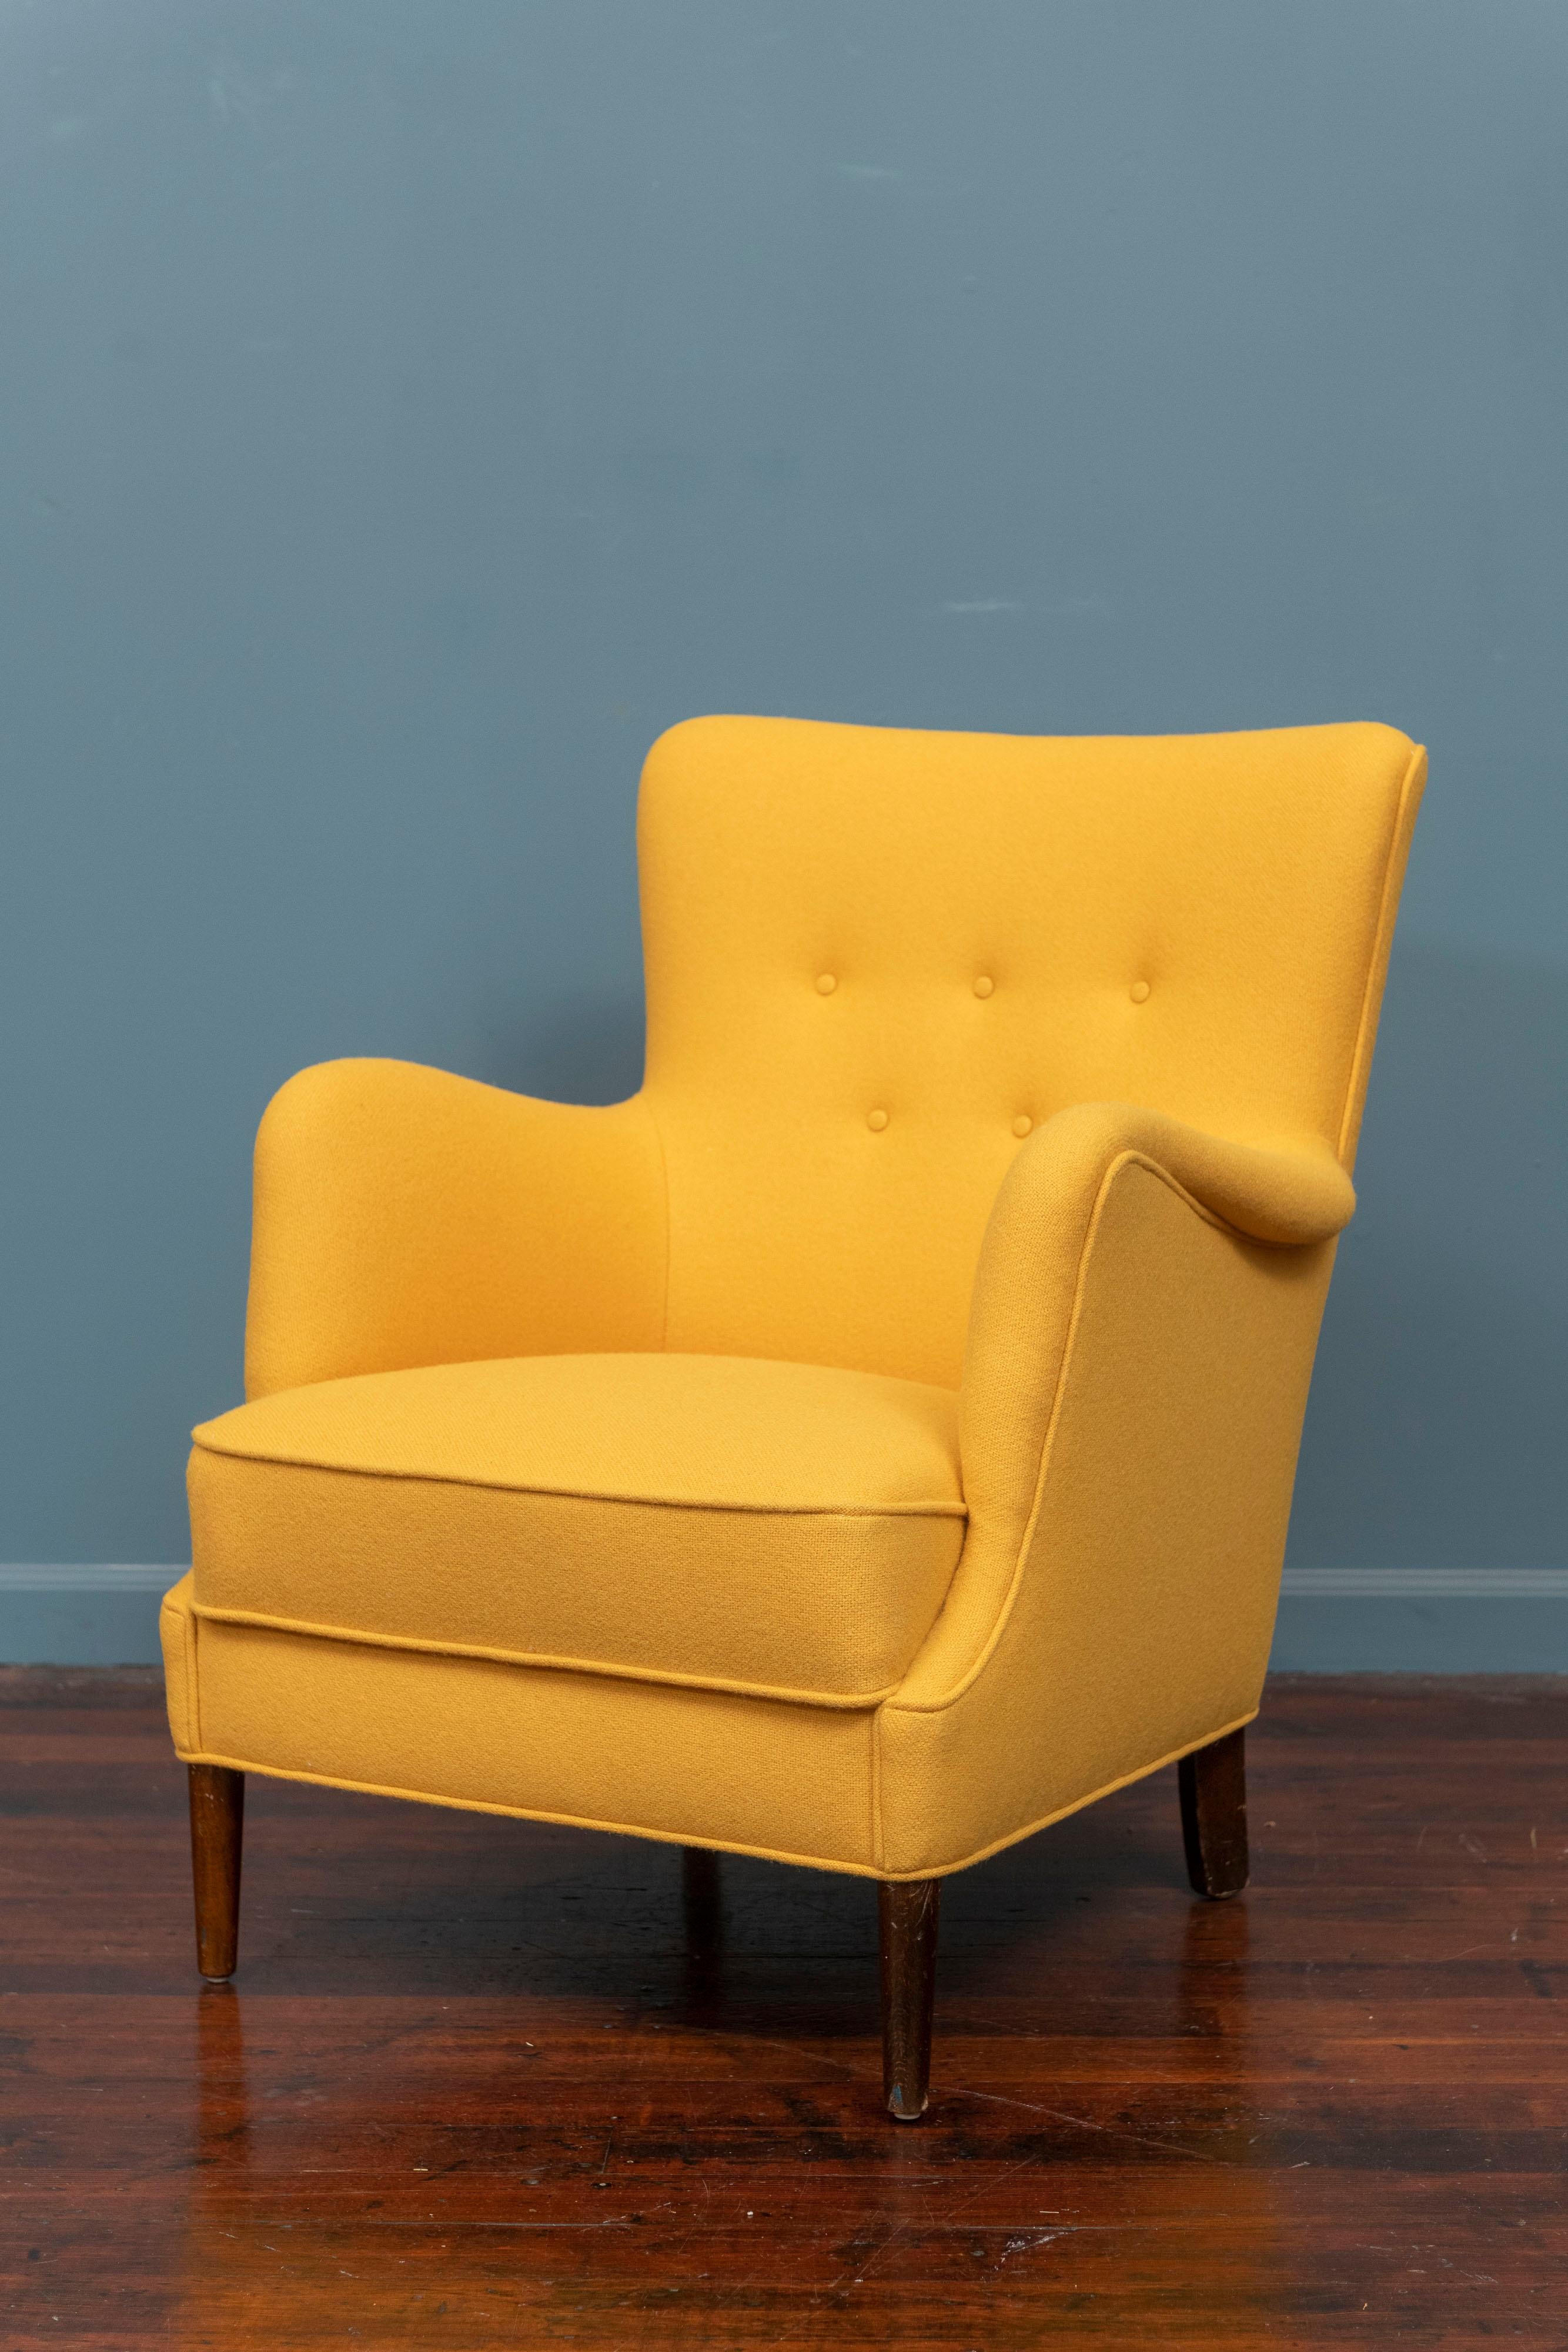 Scandinavian Modern petite lounge chair newly upholstered in a cheerful yellow wool. Super comfy and ready to be enjoyed.